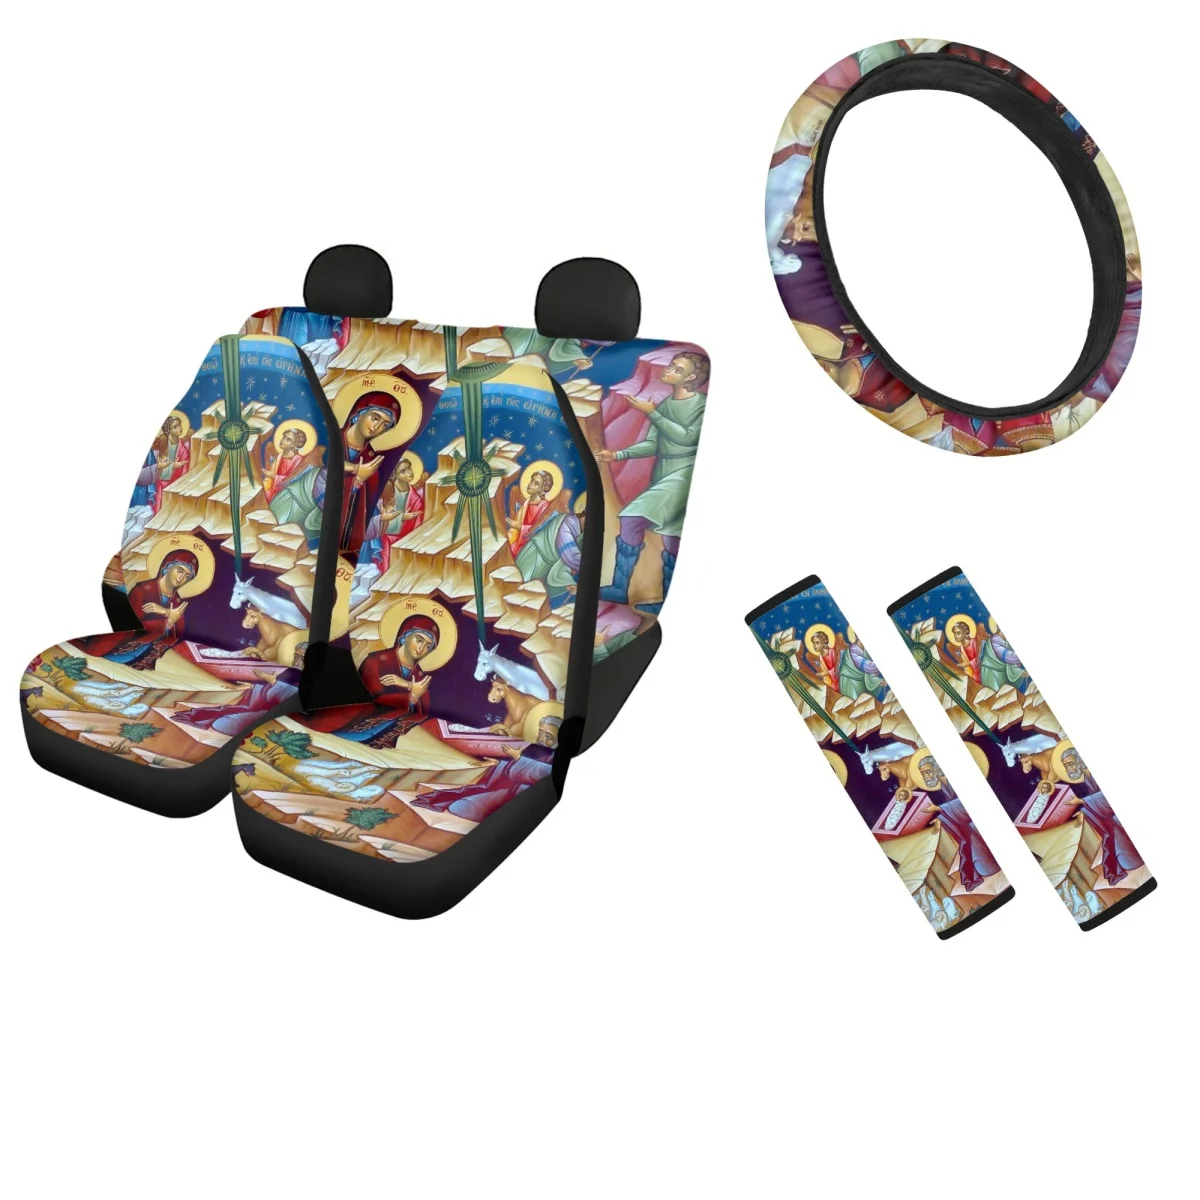 

Epiphany Pattern Design Full Set Car Seat Covers Slip-Resistant Set of 2 Shoulder Strap Pads Steering Wheel Cover Fit Most Autos